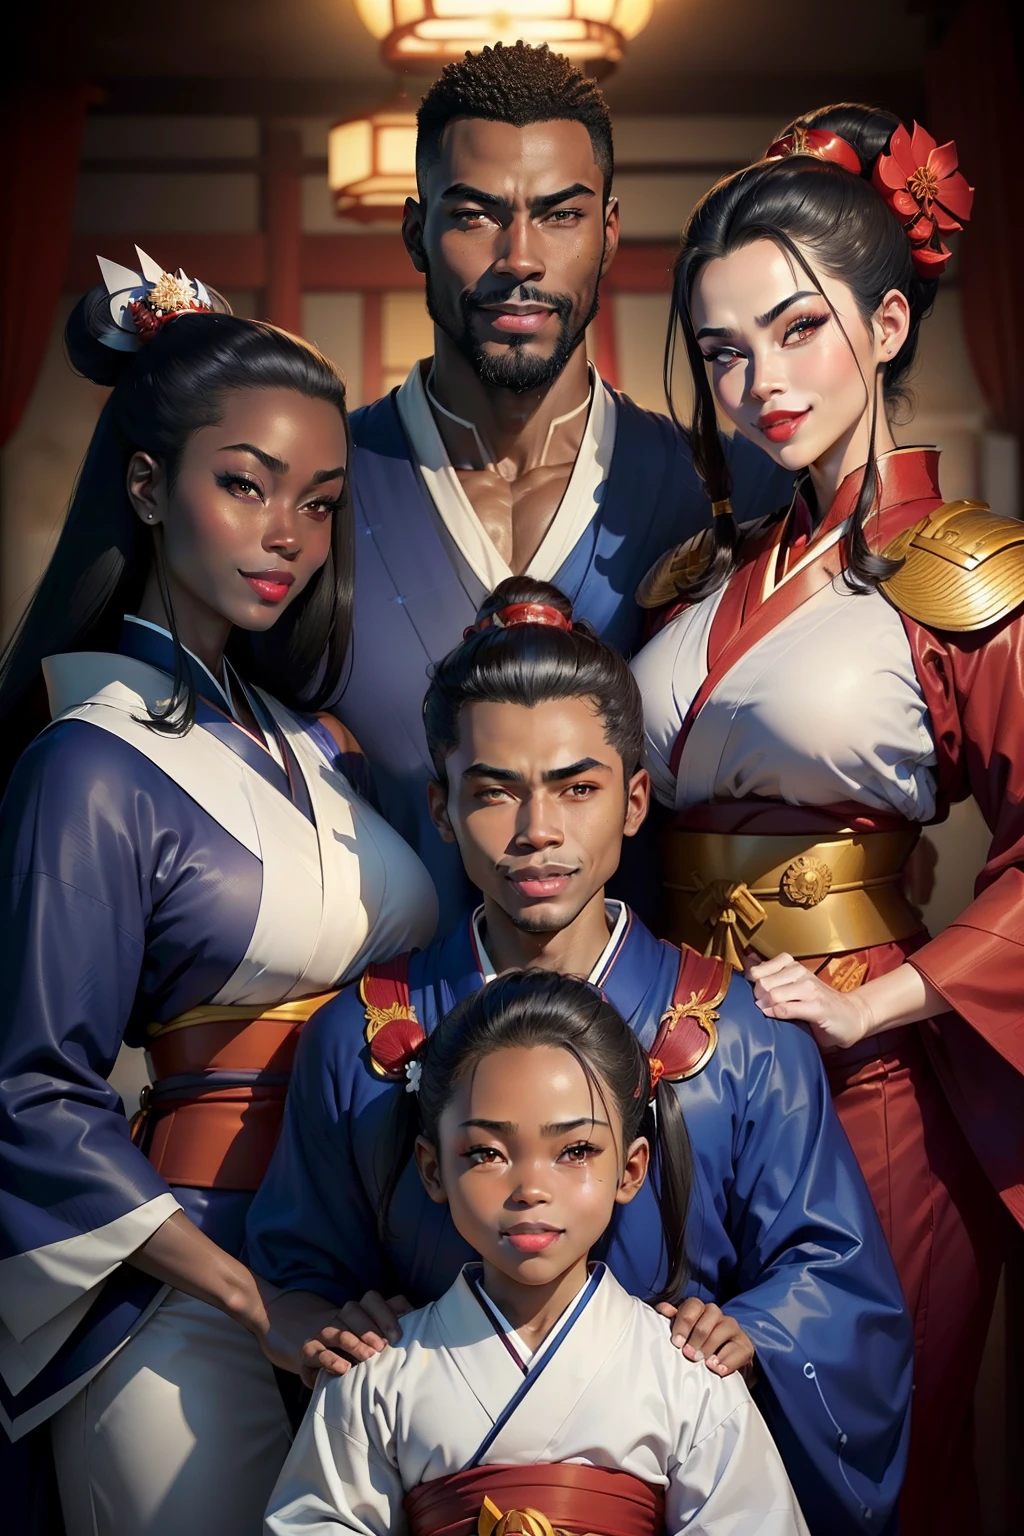 Family, ((father darkskin, clean face, chad, alpha, silly face, smiling, tall ,muscular, royal blue kimono,)),(azula, White skin, black hair,red lips, amber eyes,small frame, massive , red kimono) Children, five daughters, two sons